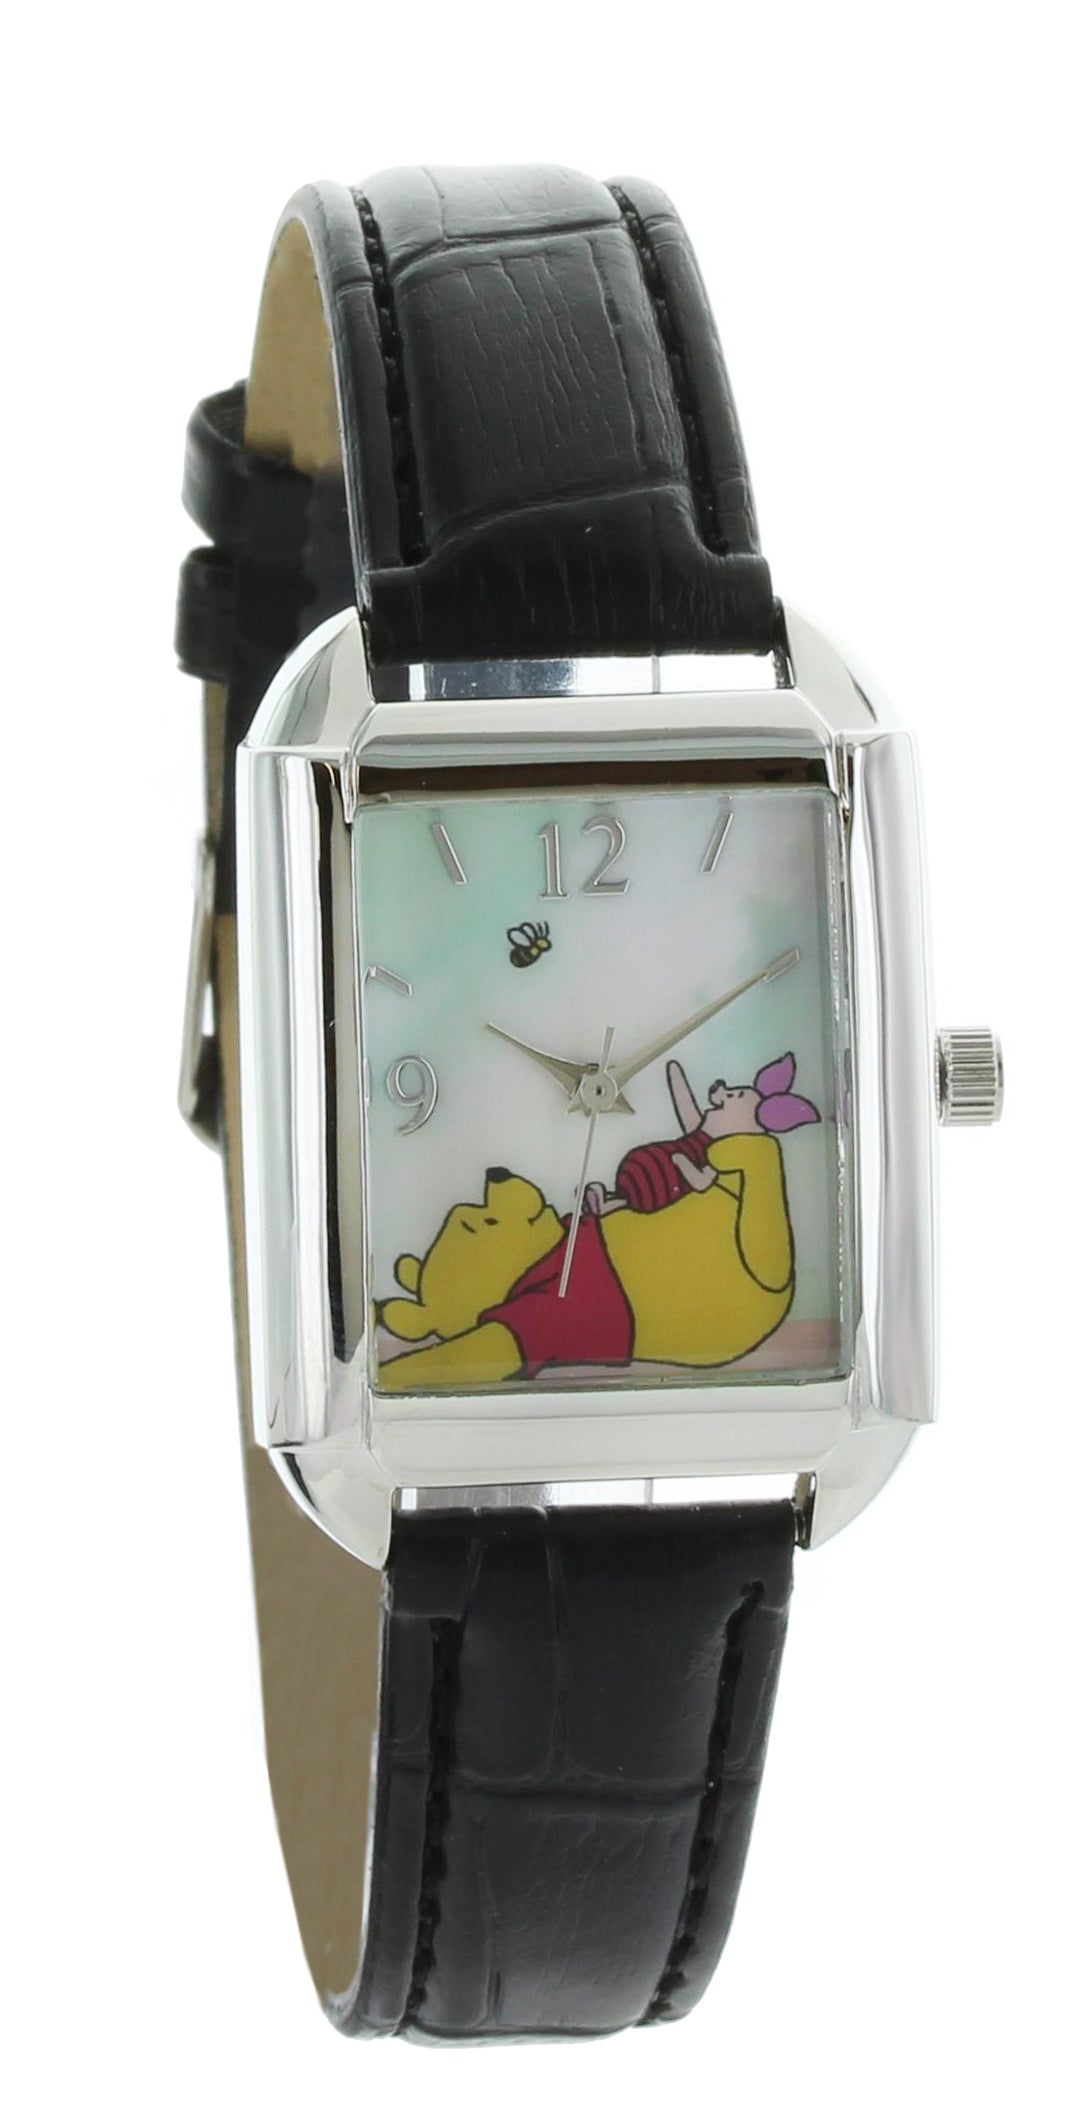 Model: Women’s Disney Watch Features Winnie Pooh and Piglet Watching a Bee, in Silver Tone with Black Band